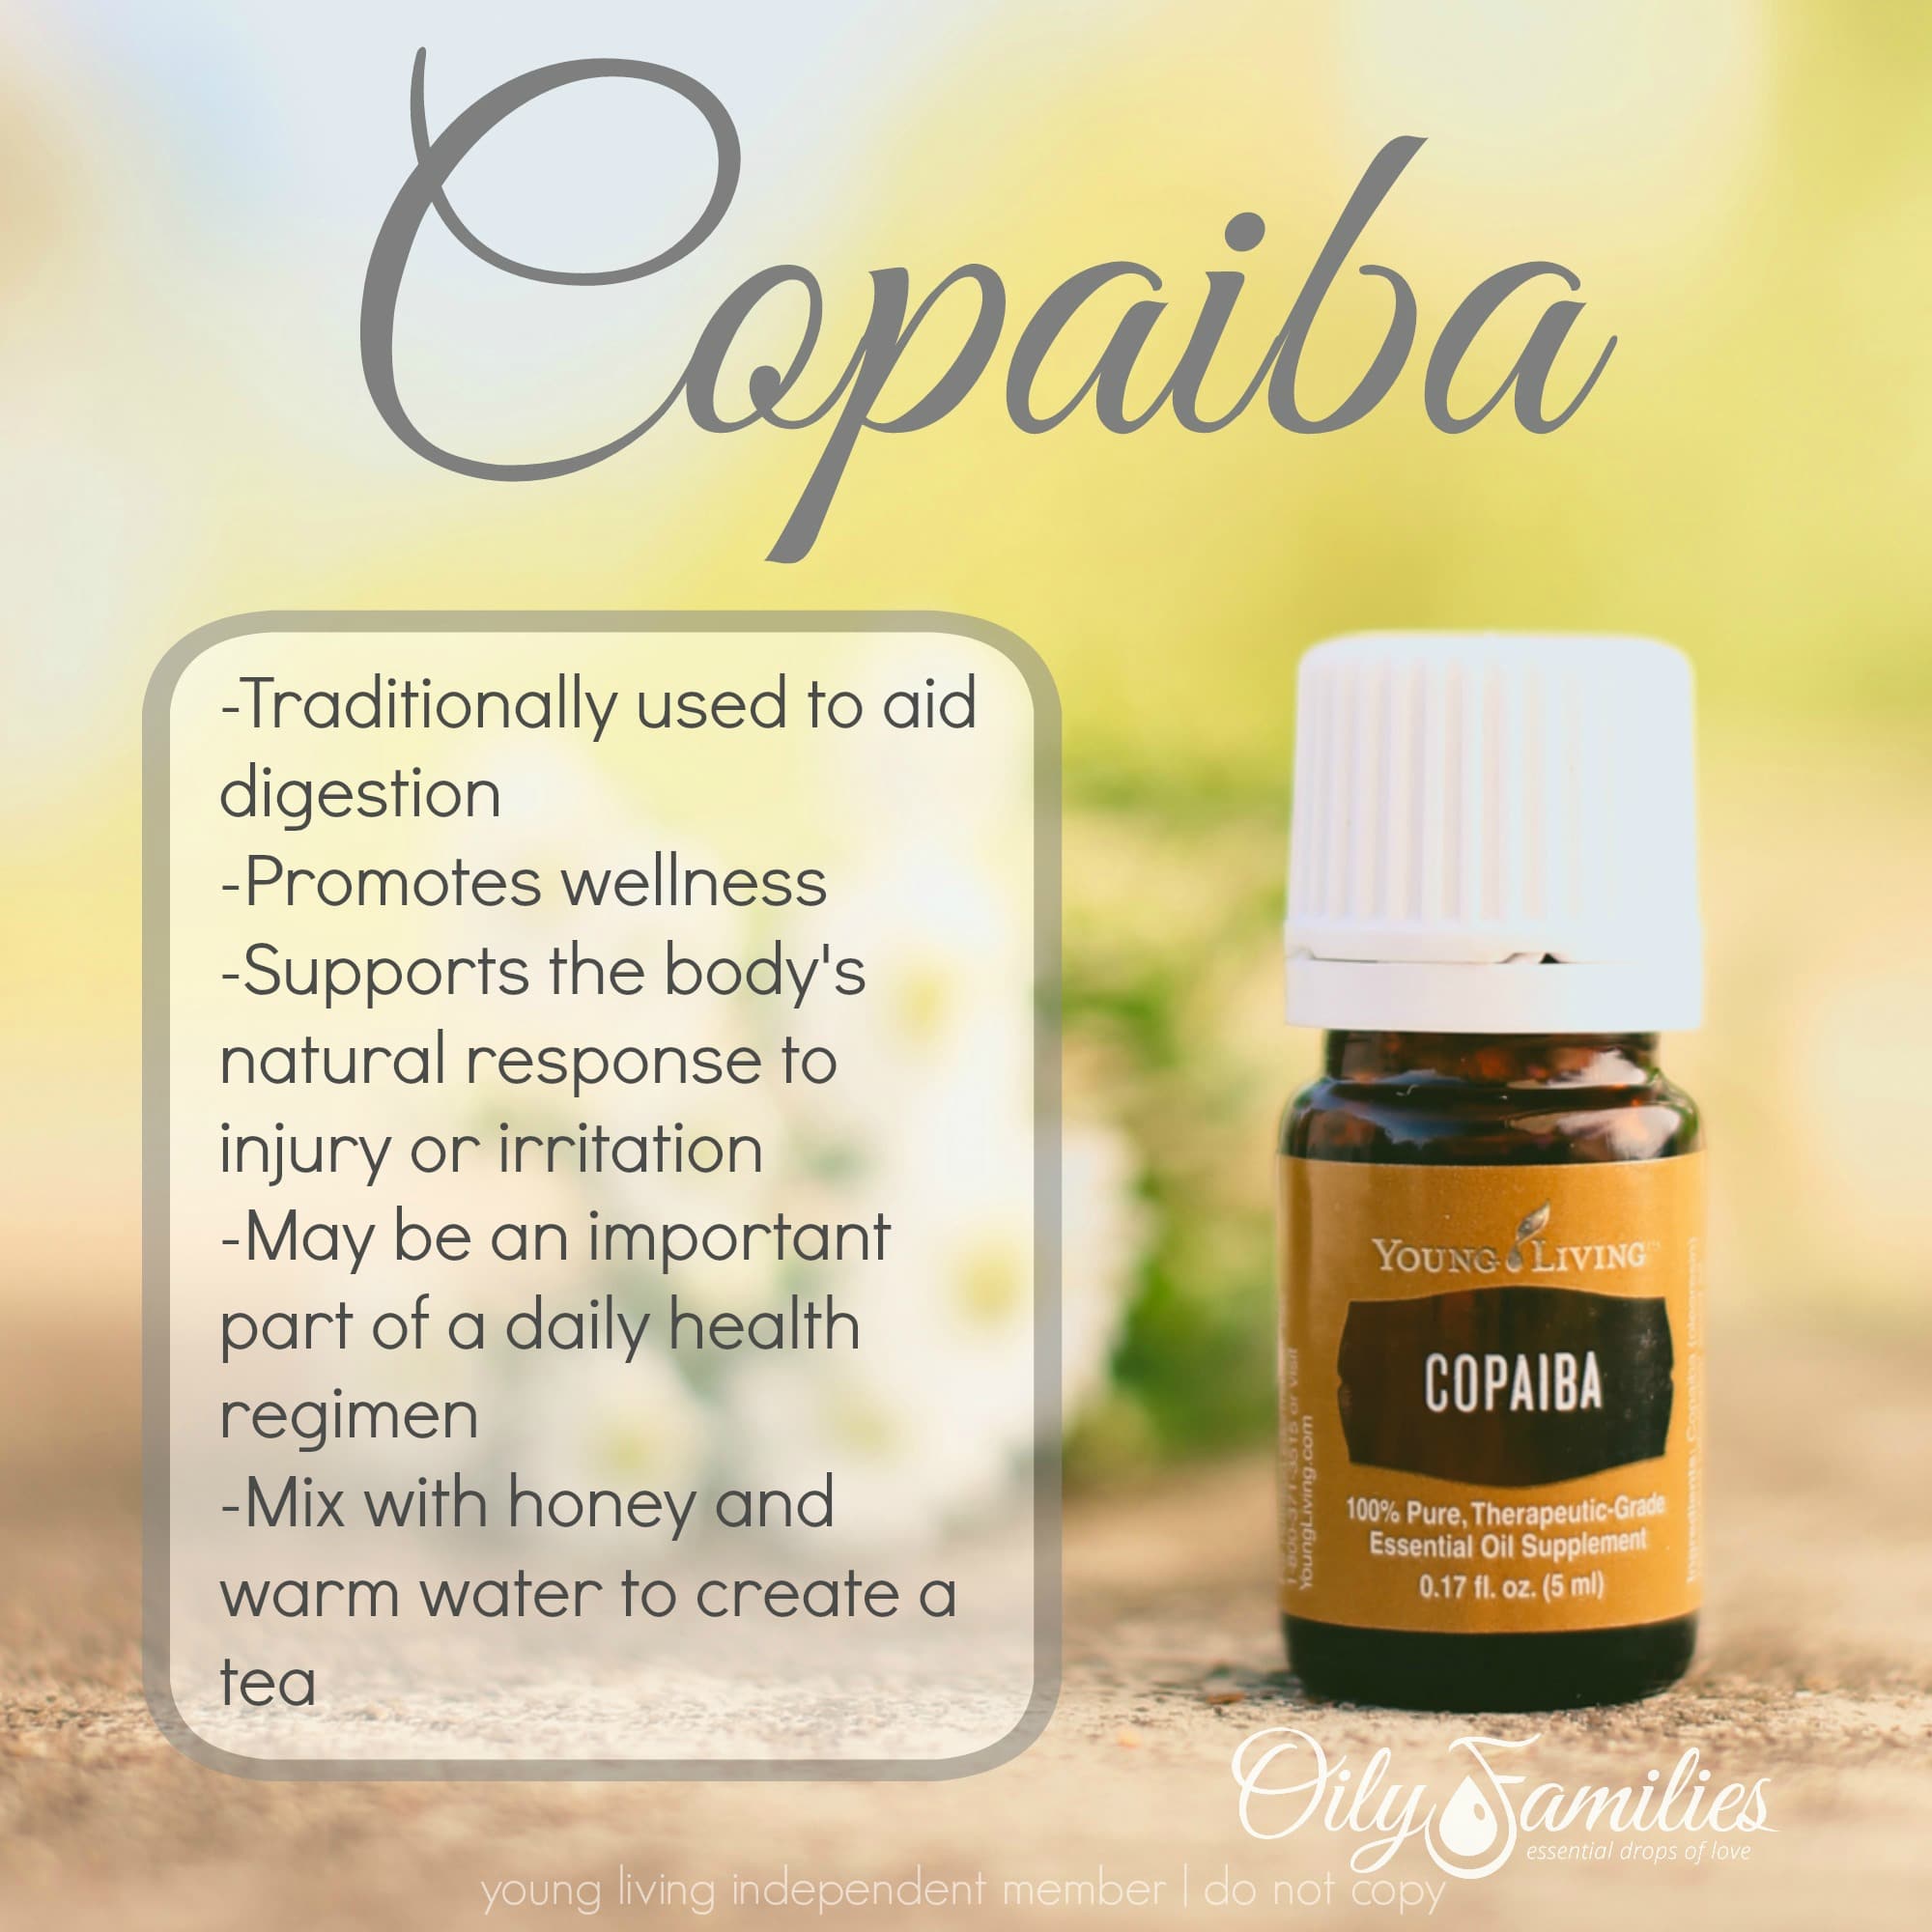 All About Copaiba Essential Oil